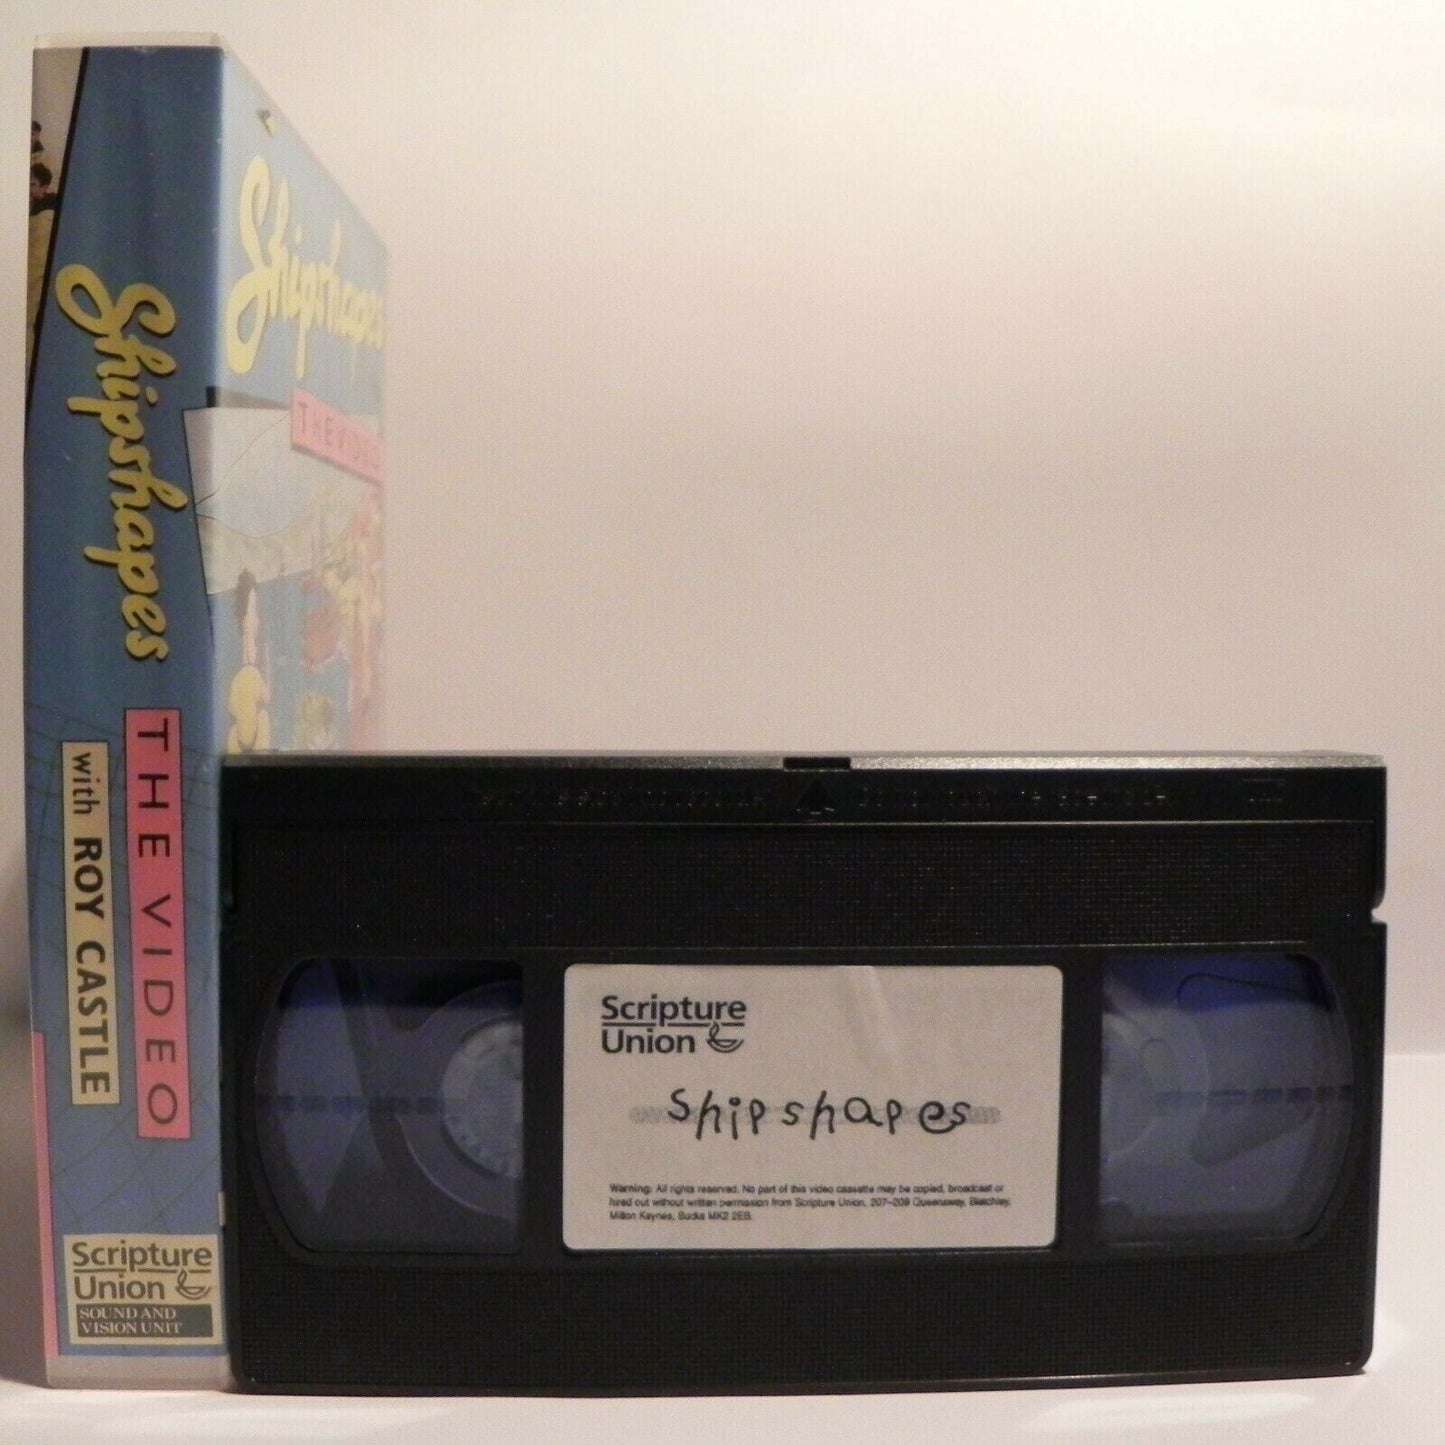 Shipshapes: The Video (Roy Castle) - Bible Based Stories - Children's - Pal VHS-